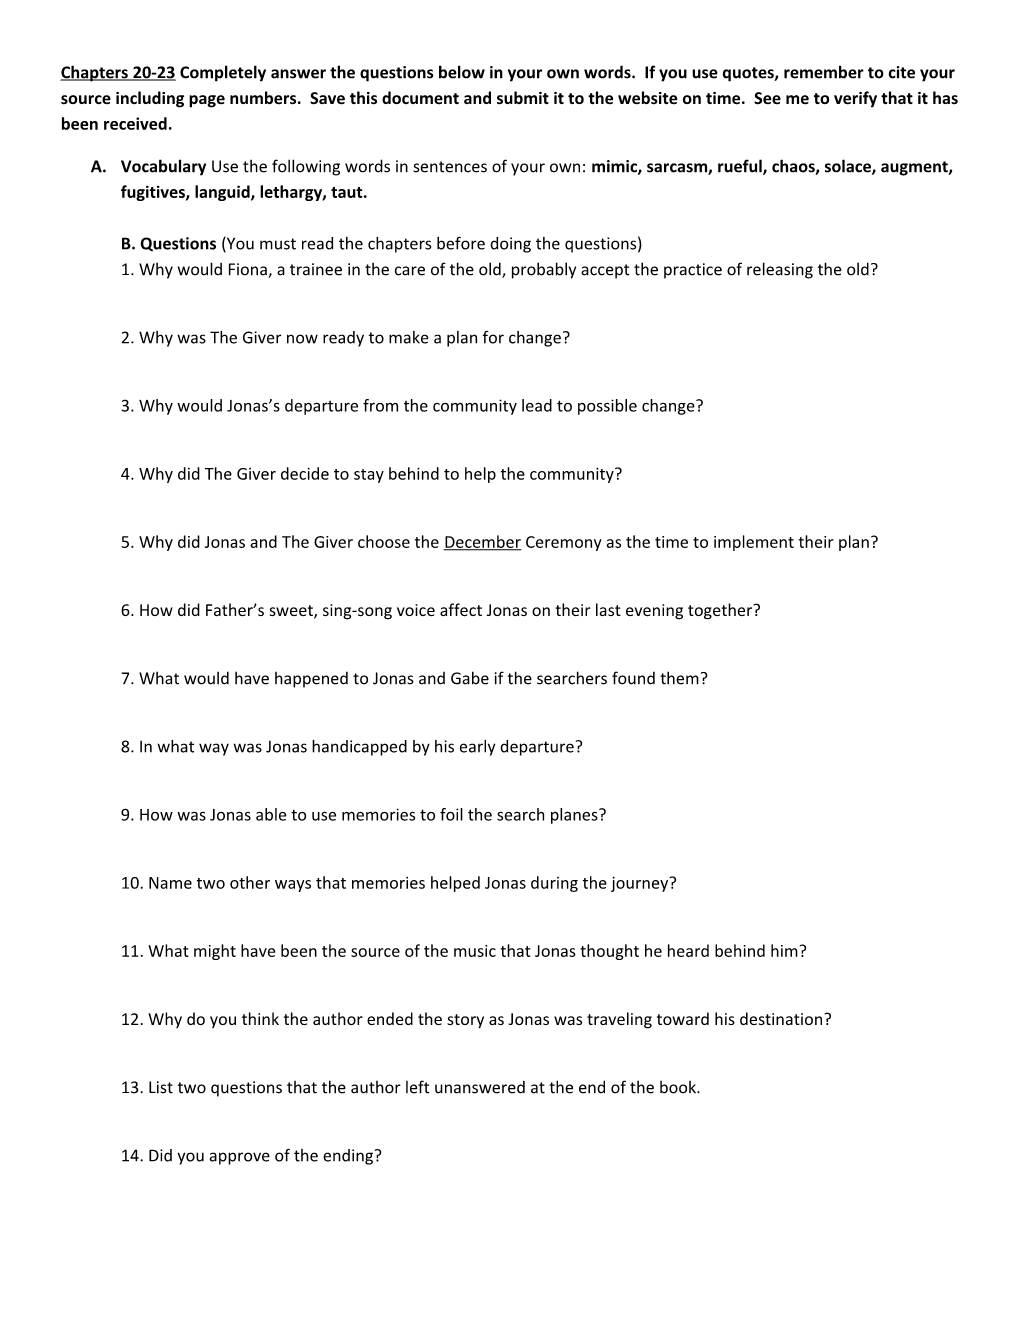 Chapters 20-23 Completely Answer the Questions Below in Your Own Words. If You Use Quotes